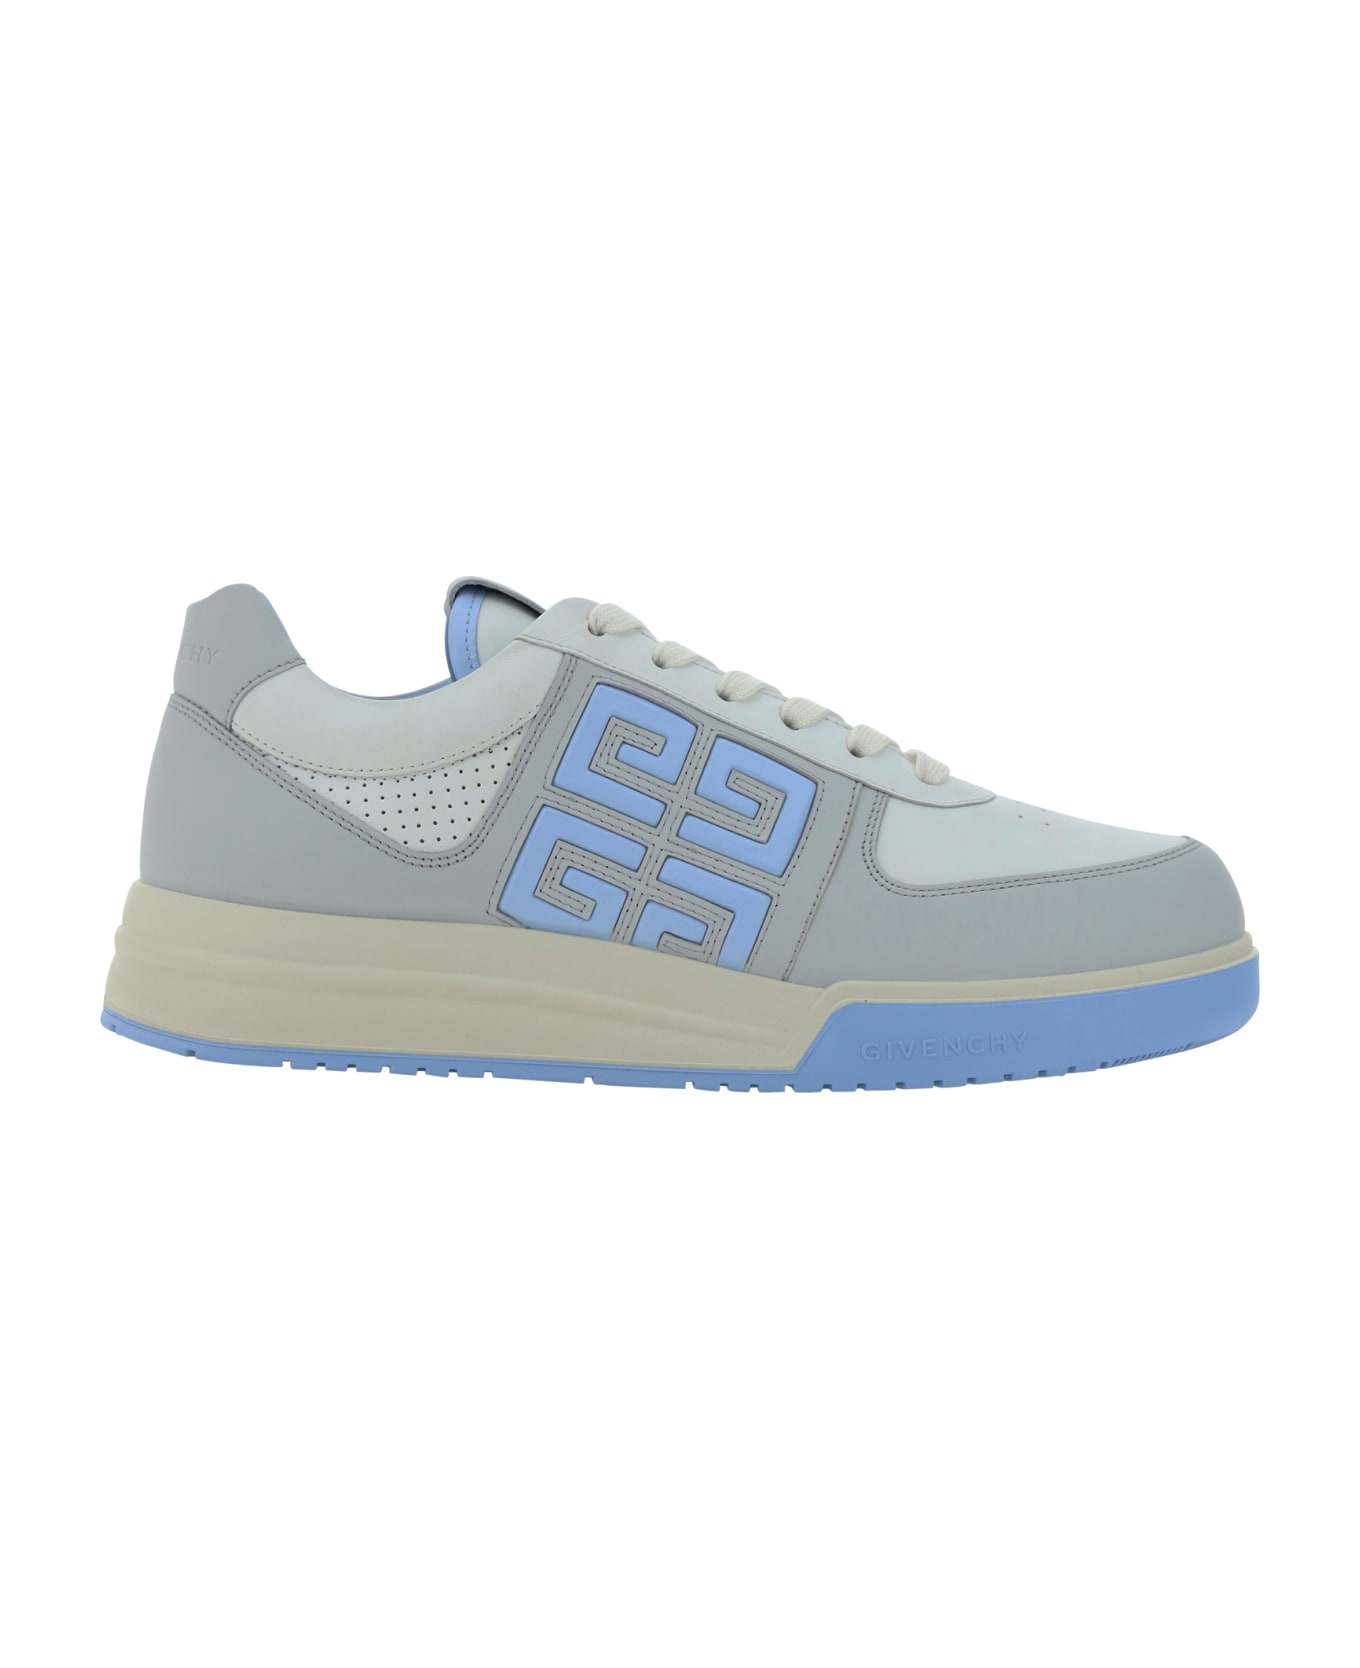 Givenchy G4 Low Top Sneakers - Grey/blue スニーカー